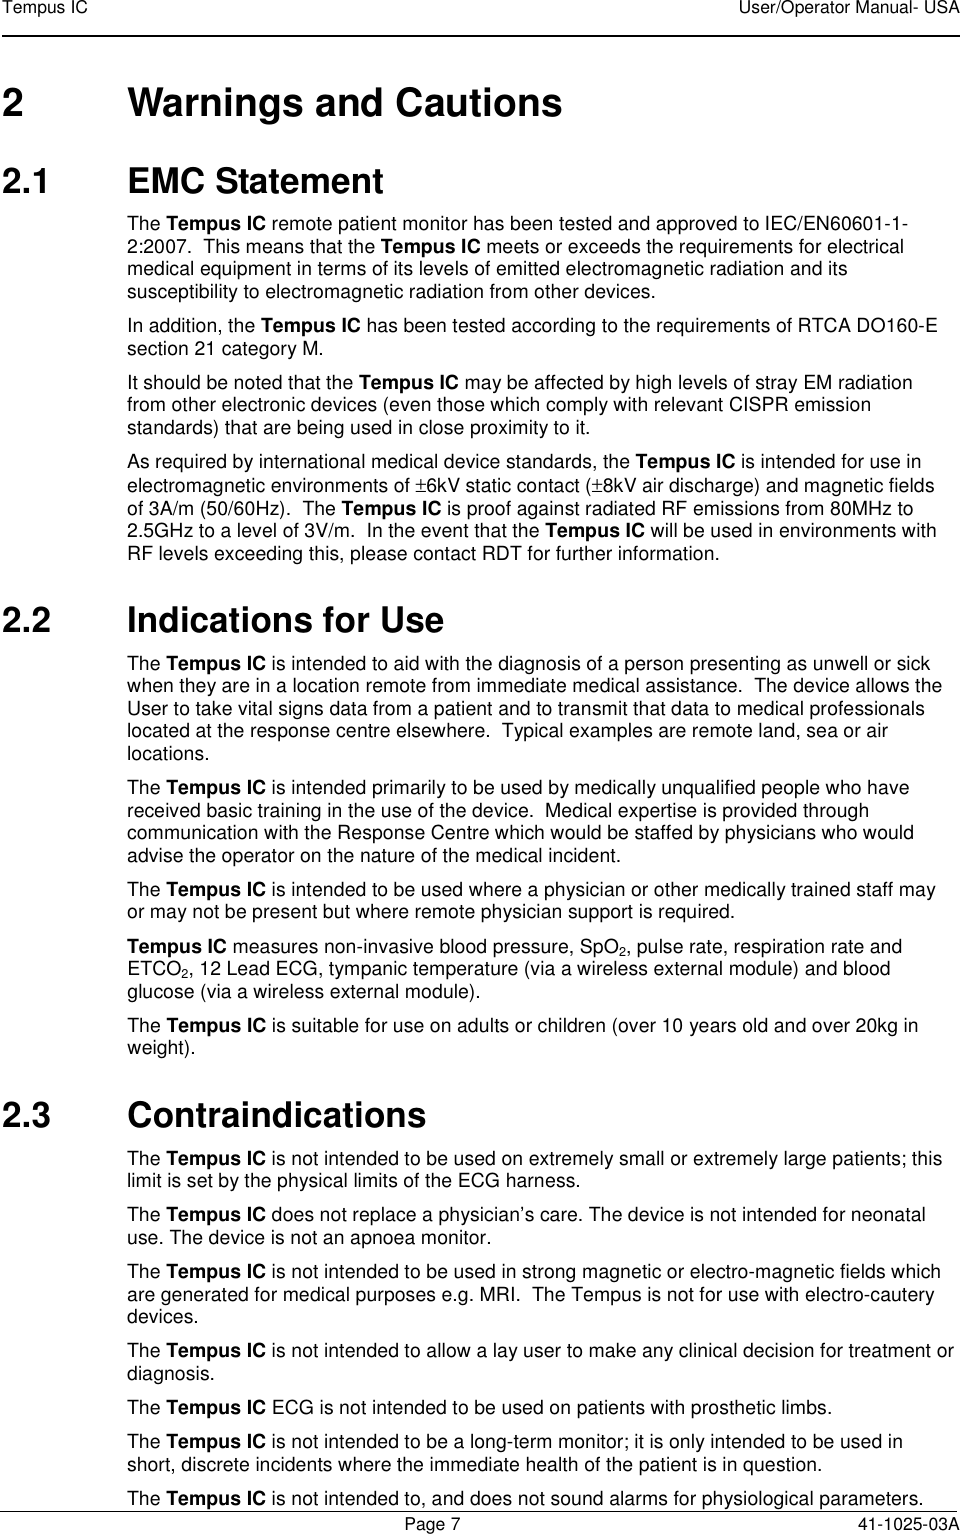 Tempus IC    User/Operator Manual- USA        Page 7  41-1025-03A 2  Warnings and Cautions 2.1  EMC Statement The Tempus IC remote patient monitor has been tested and approved to IEC/EN60601-1-2:2007.  This means that the Tempus IC meets or exceeds the requirements for electrical medical equipment in terms of its levels of emitted electromagnetic radiation and its susceptibility to electromagnetic radiation from other devices. In addition, the Tempus IC has been tested according to the requirements of RTCA DO160-E section 21 category M. It should be noted that the Tempus IC may be affected by high levels of stray EM radiation from other electronic devices (even those which comply with relevant CISPR emission standards) that are being used in close proximity to it.   As required by international medical device standards, the Tempus IC is intended for use in electromagnetic environments of ±6kV static contact (±8kV air discharge) and magnetic fields of 3A/m (50/60Hz).  The Tempus IC is proof against radiated RF emissions from 80MHz to 2.5GHz to a level of 3V/m.  In the event that the Tempus IC will be used in environments with RF levels exceeding this, please contact RDT for further information. 2.2  Indications for Use The Tempus IC is intended to aid with the diagnosis of a person presenting as unwell or sick when they are in a location remote from immediate medical assistance.  The device allows the User to take vital signs data from a patient and to transmit that data to medical professionals located at the response centre elsewhere.  Typical examples are remote land, sea or air locations.   The Tempus IC is intended primarily to be used by medically unqualified people who have received basic training in the use of the device.  Medical expertise is provided through communication with the Response Centre which would be staffed by physicians who would advise the operator on the nature of the medical incident.   The Tempus IC is intended to be used where a physician or other medically trained staff may or may not be present but where remote physician support is required. Tempus IC measures non-invasive blood pressure, SpO2, pulse rate, respiration rate and ETCO2, 12 Lead ECG, tympanic temperature (via a wireless external module) and blood glucose (via a wireless external module).   The Tempus IC is suitable for use on adults or children (over 10 years old and over 20kg in weight). 2.3  Contraindications The Tempus IC is not intended to be used on extremely small or extremely large patients; this limit is set by the physical limits of the ECG harness. The Tempus IC does not replace a physician’s care. The device is not intended for neonatal use. The device is not an apnoea monitor.   The Tempus IC is not intended to be used in strong magnetic or electro-magnetic fields which are generated for medical purposes e.g. MRI.  The Tempus is not for use with electro-cautery devices. The Tempus IC is not intended to allow a lay user to make any clinical decision for treatment or diagnosis.   The Tempus IC ECG is not intended to be used on patients with prosthetic limbs. The Tempus IC is not intended to be a long-term monitor; it is only intended to be used in short, discrete incidents where the immediate health of the patient is in question. The Tempus IC is not intended to, and does not sound alarms for physiological parameters. 